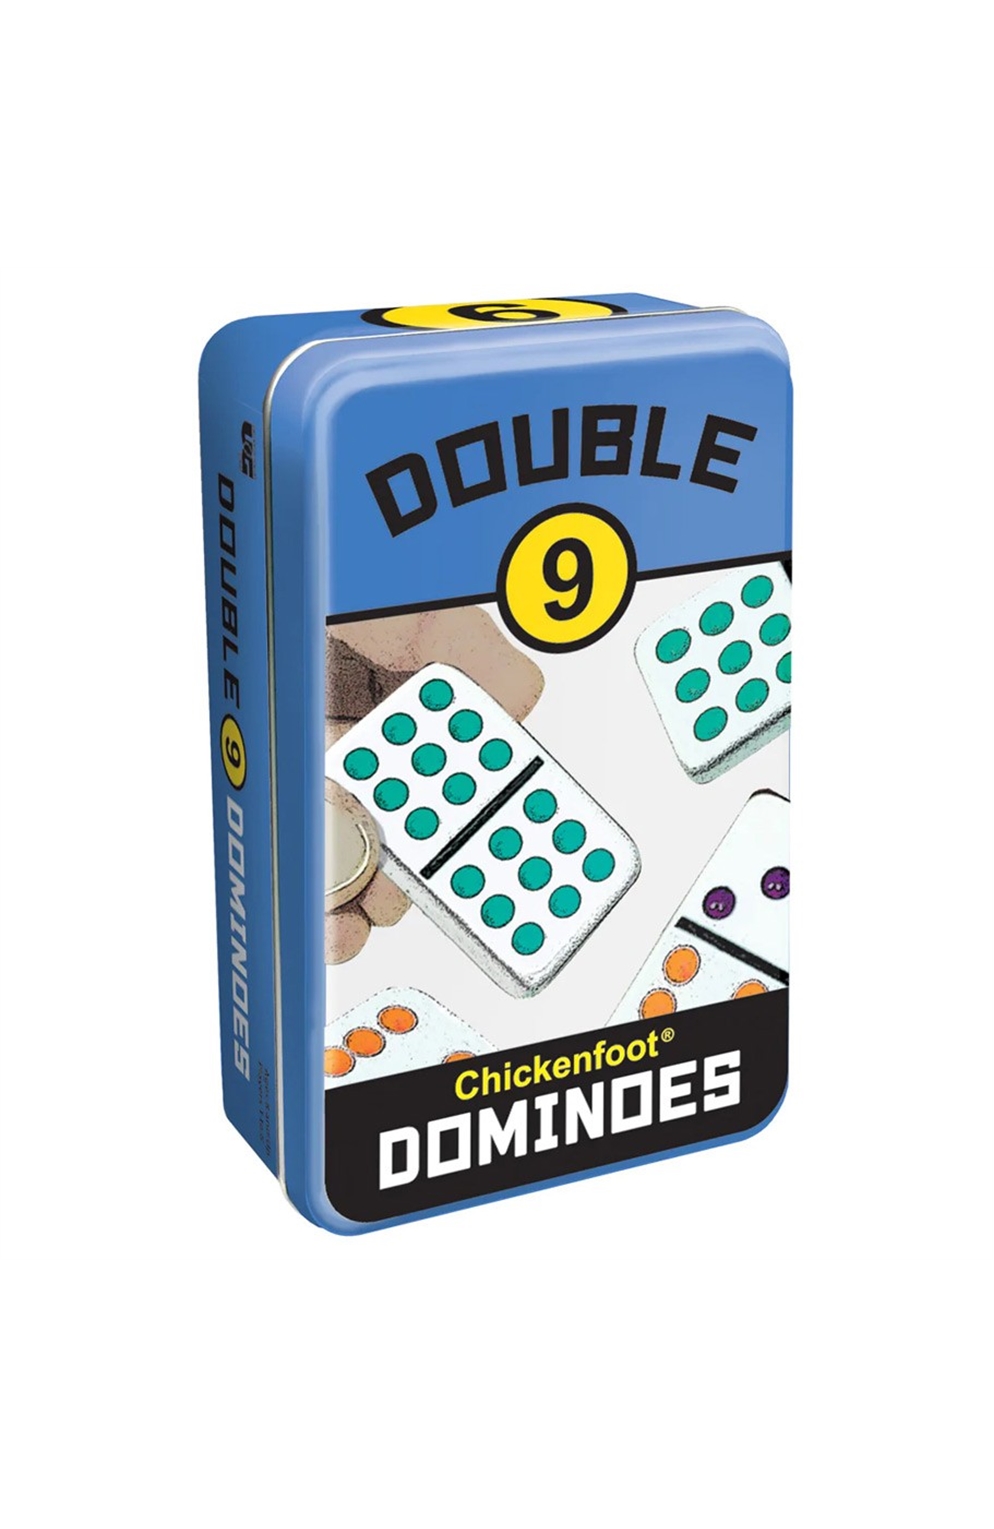 Dominoes: Double 9 Chickenfoot